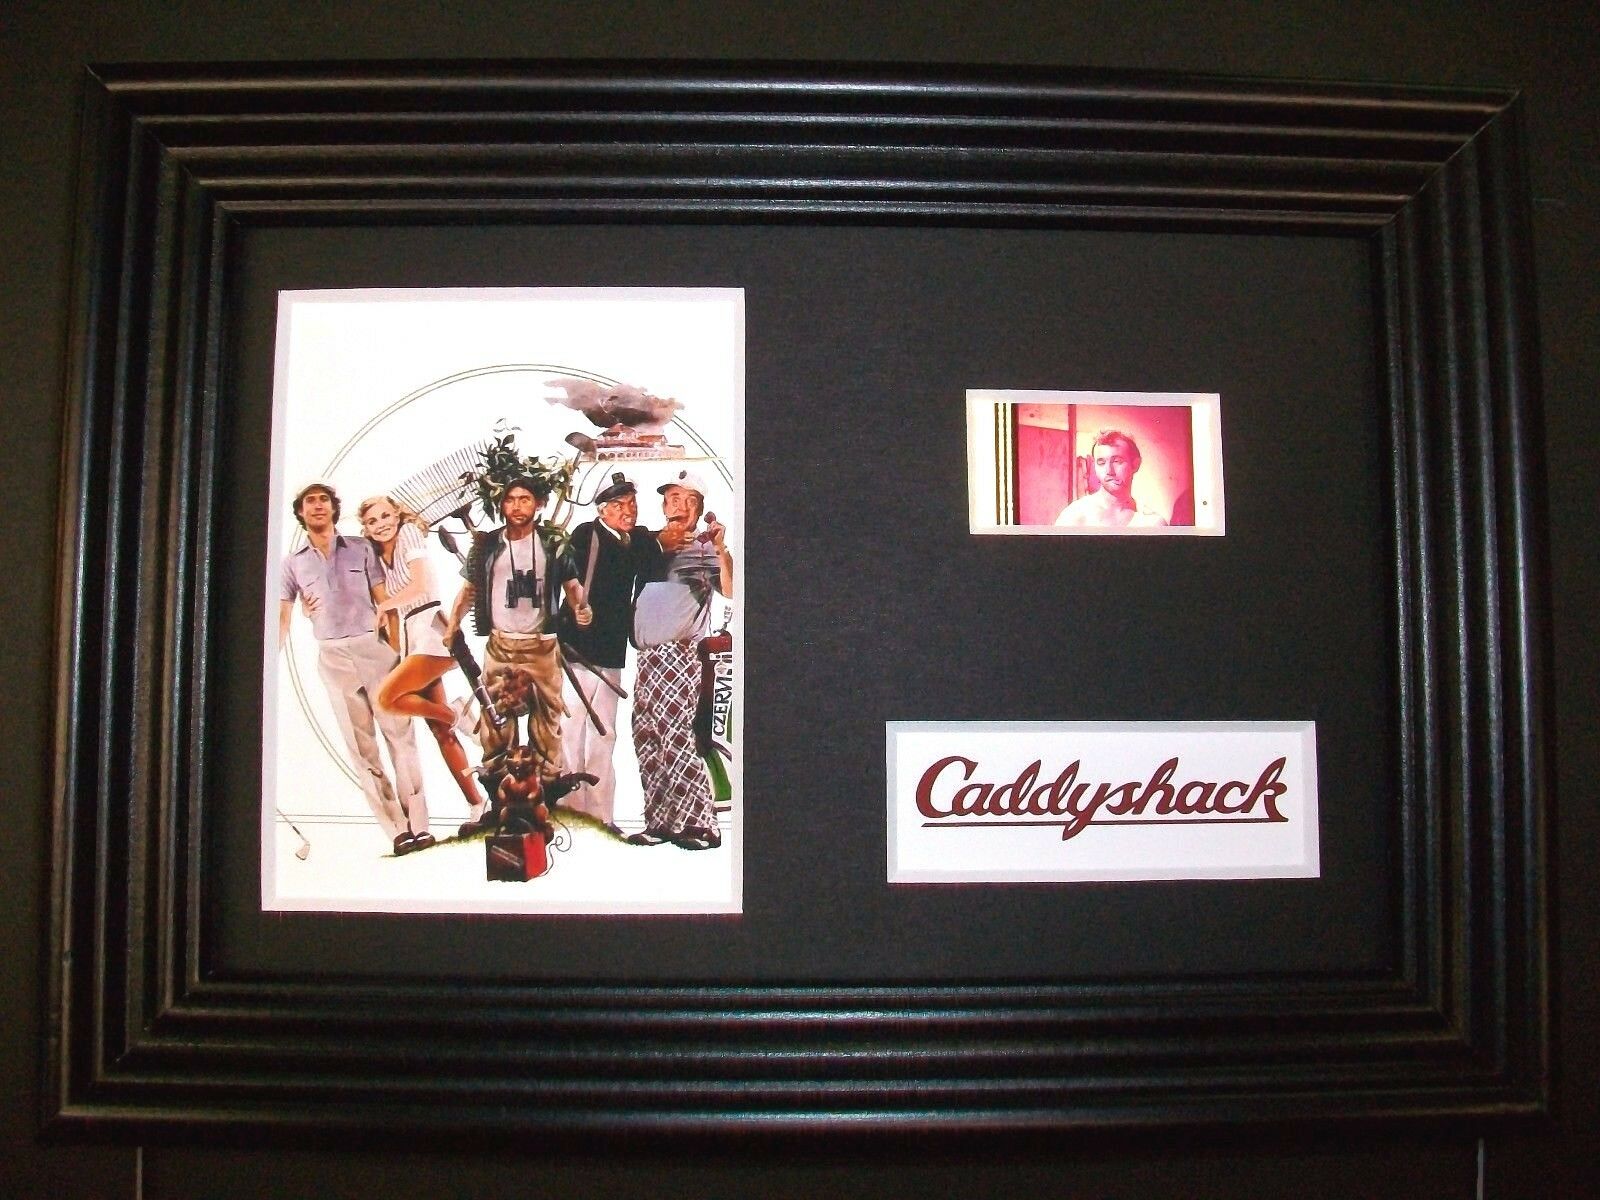 Caddyshack Framed Movie Film Cell Memorabilia Compliments Poster Dvd Book